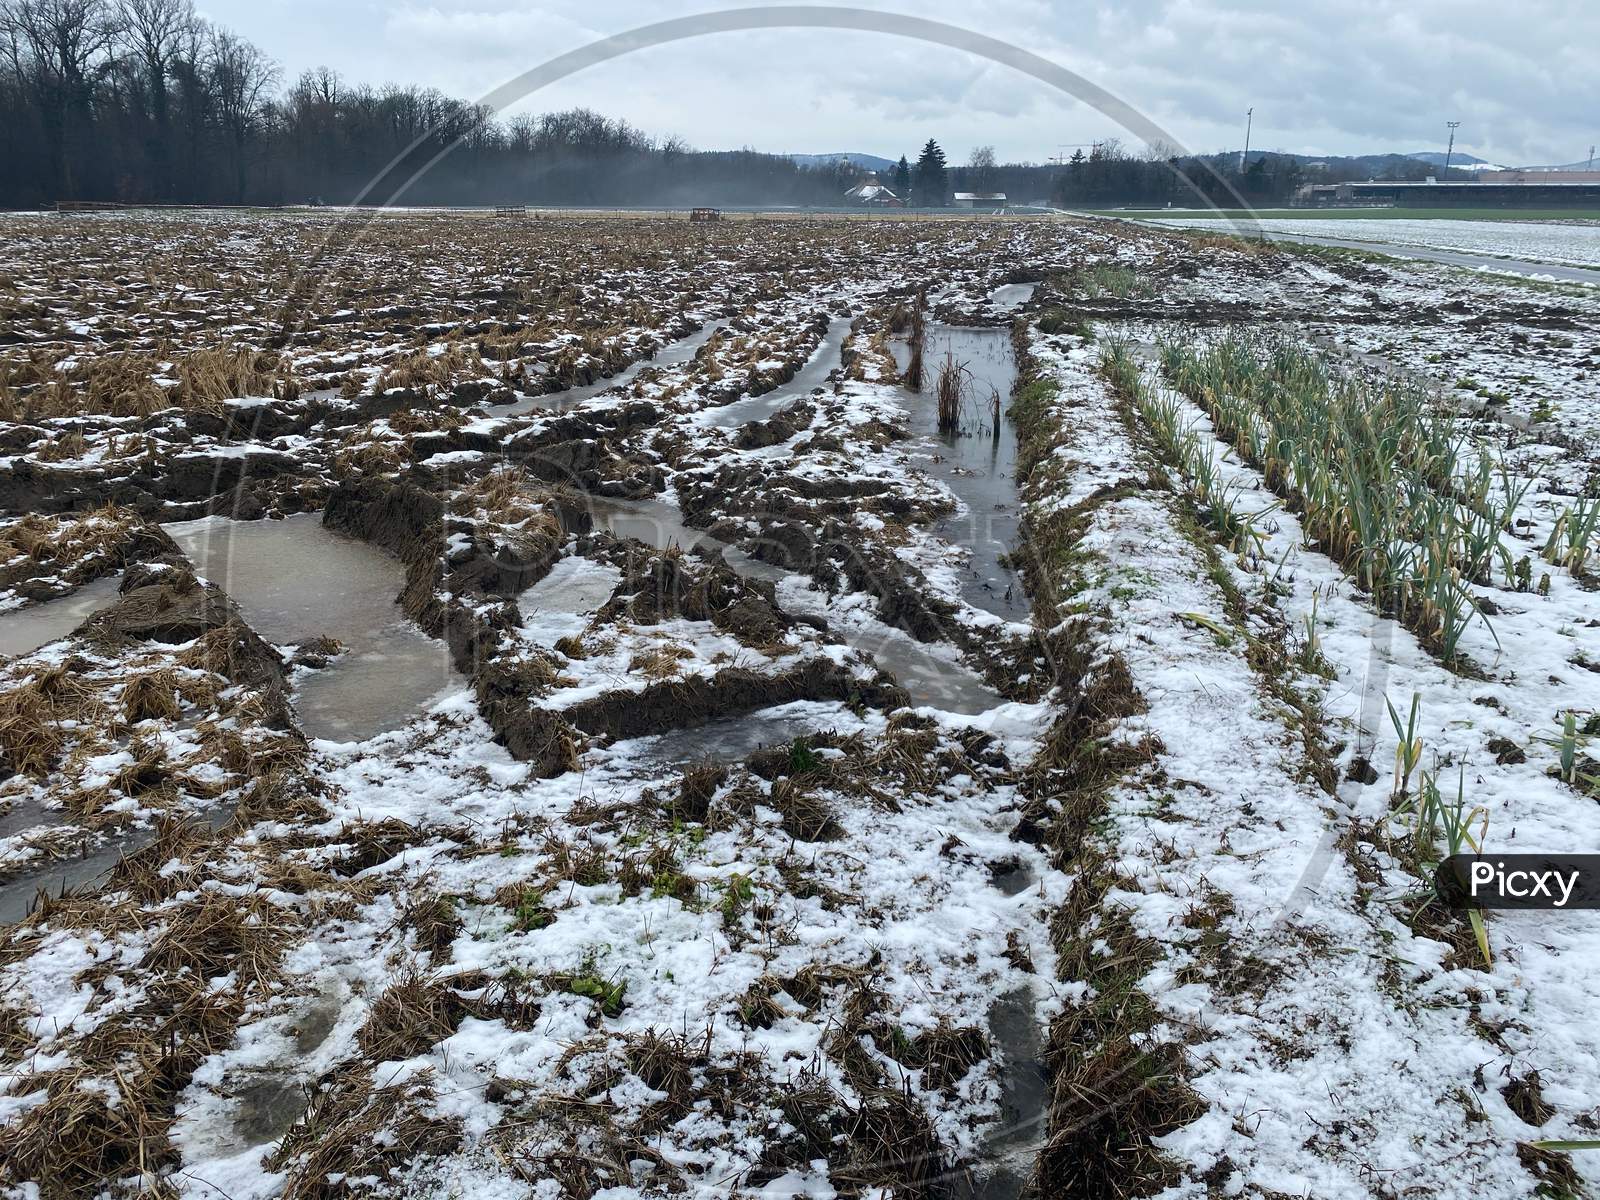 Test Field Of Rice In Brugg Switzerland In Wintertime. Experiment With Growing Conditions